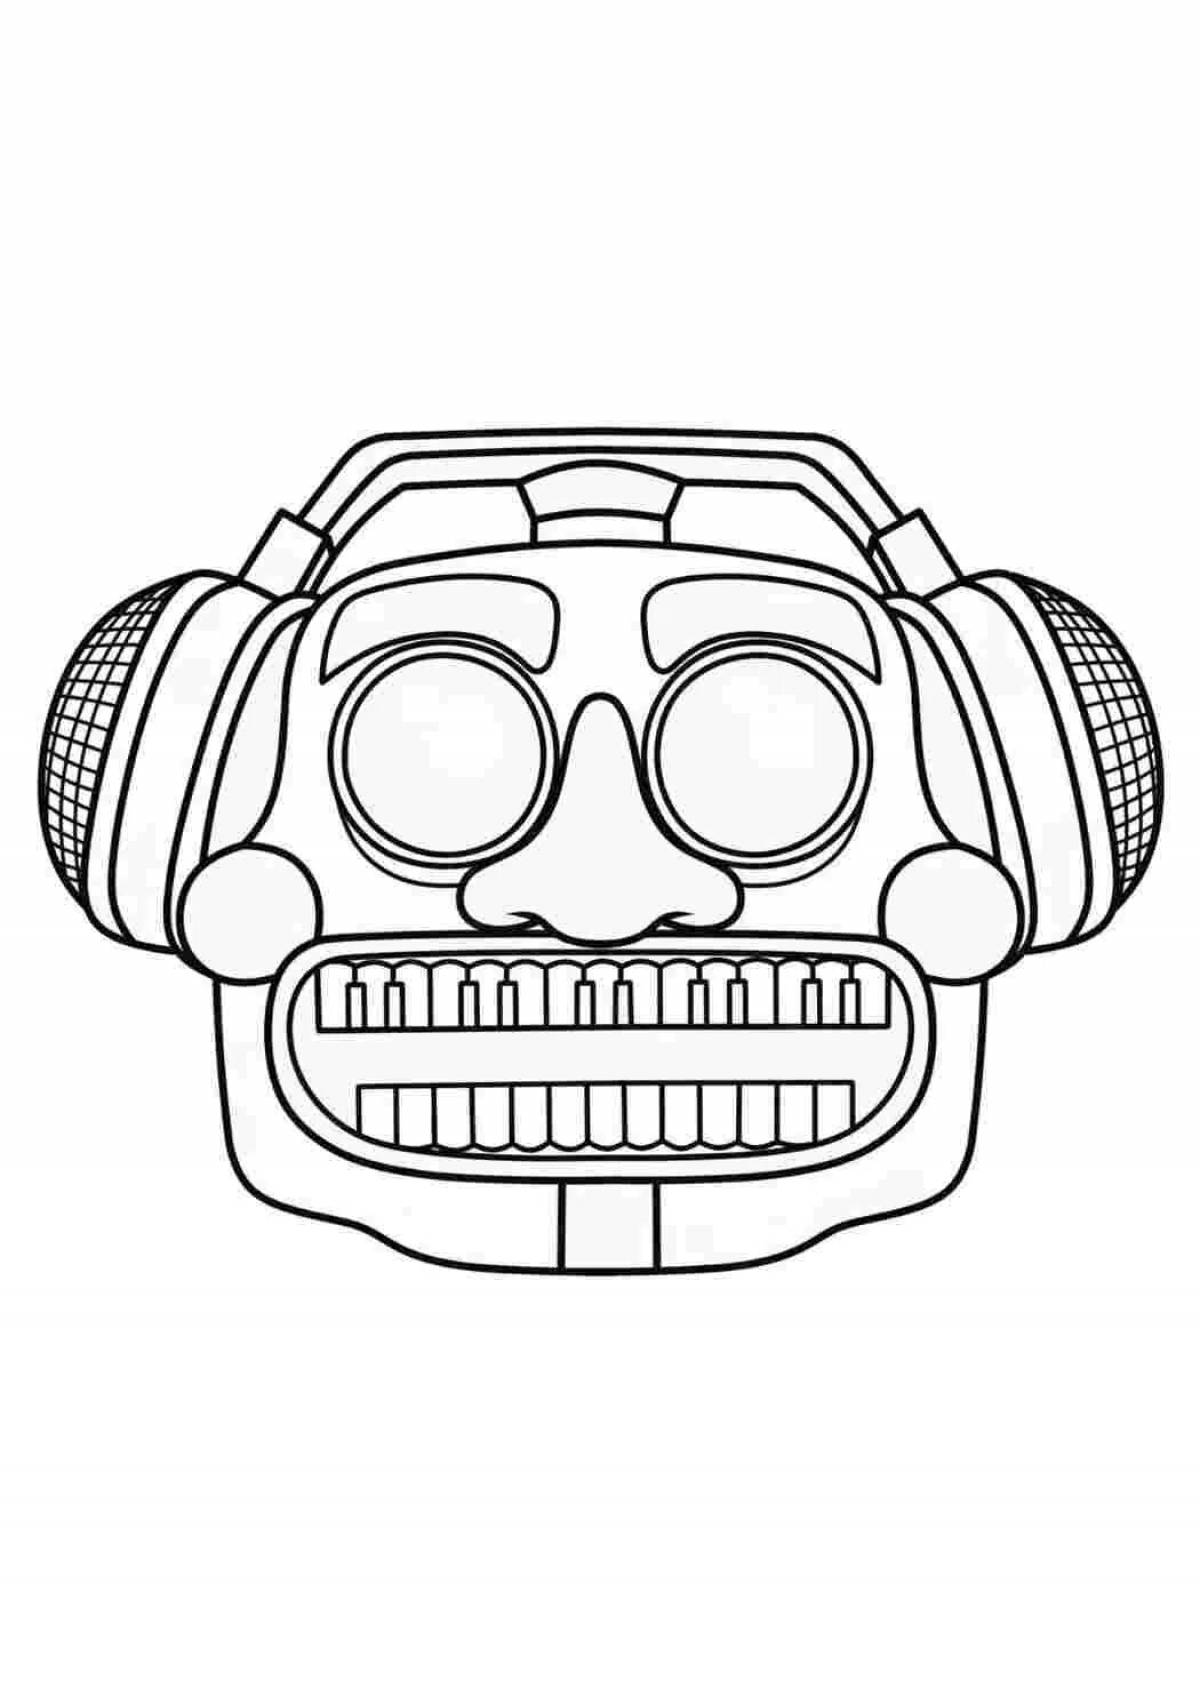 Coloring page ecstatic dj